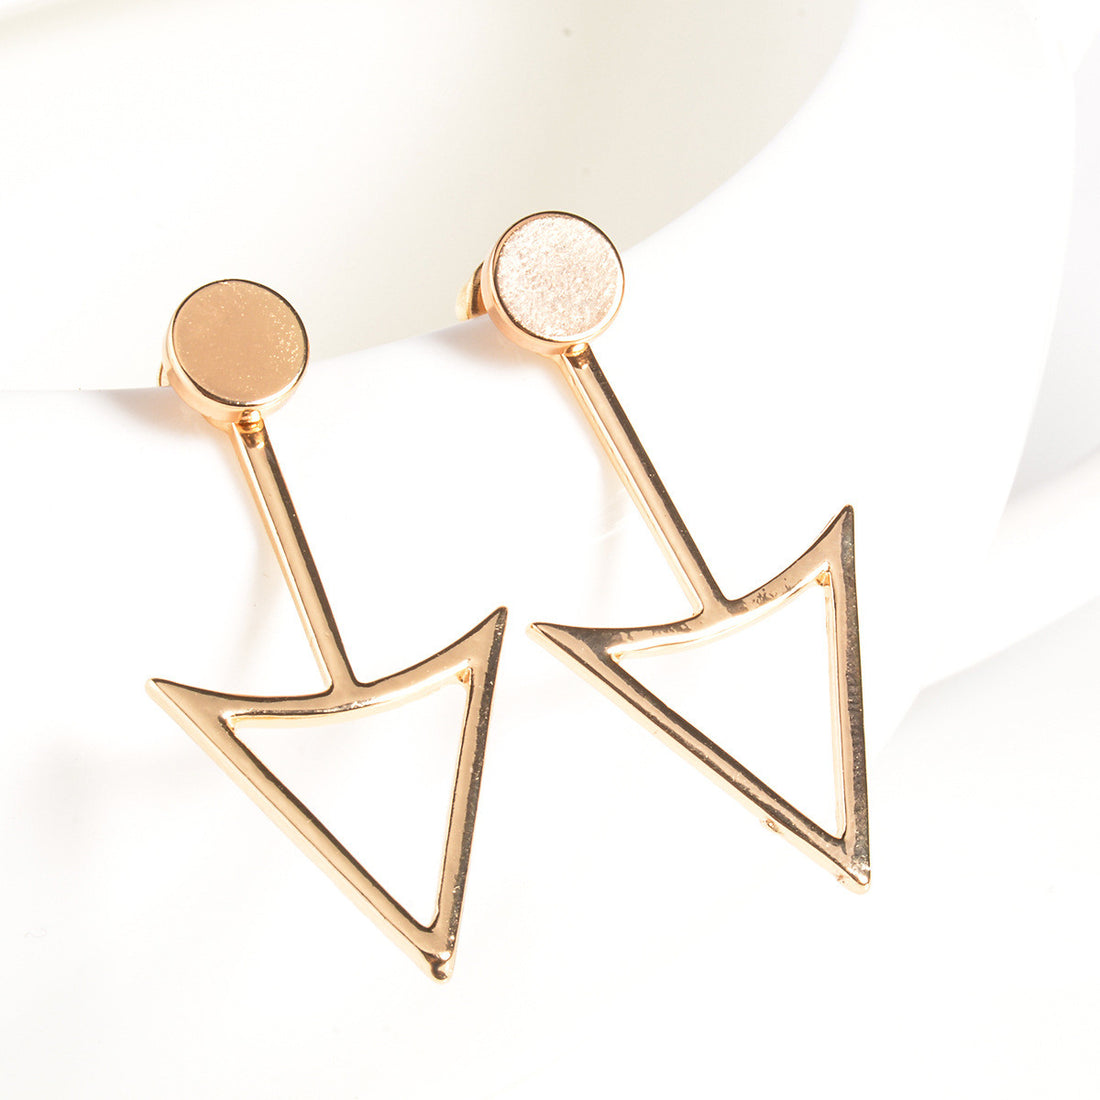 Unique Triangle Women's Earrings - Oh Yours Fashion - 1